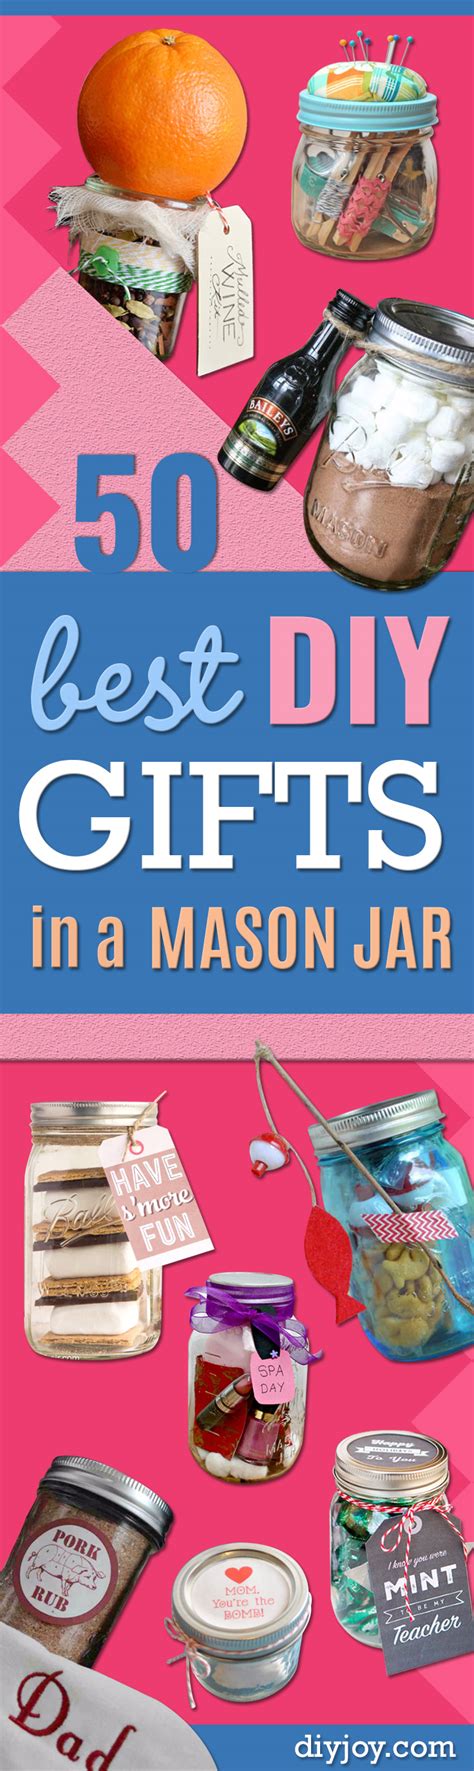 The thing about having a best friend is you know them inside out, and you also have a pretty good idea about things they need, sometimes even before they realise table of contents. 50 Best DIY Gifts in Mason Jars